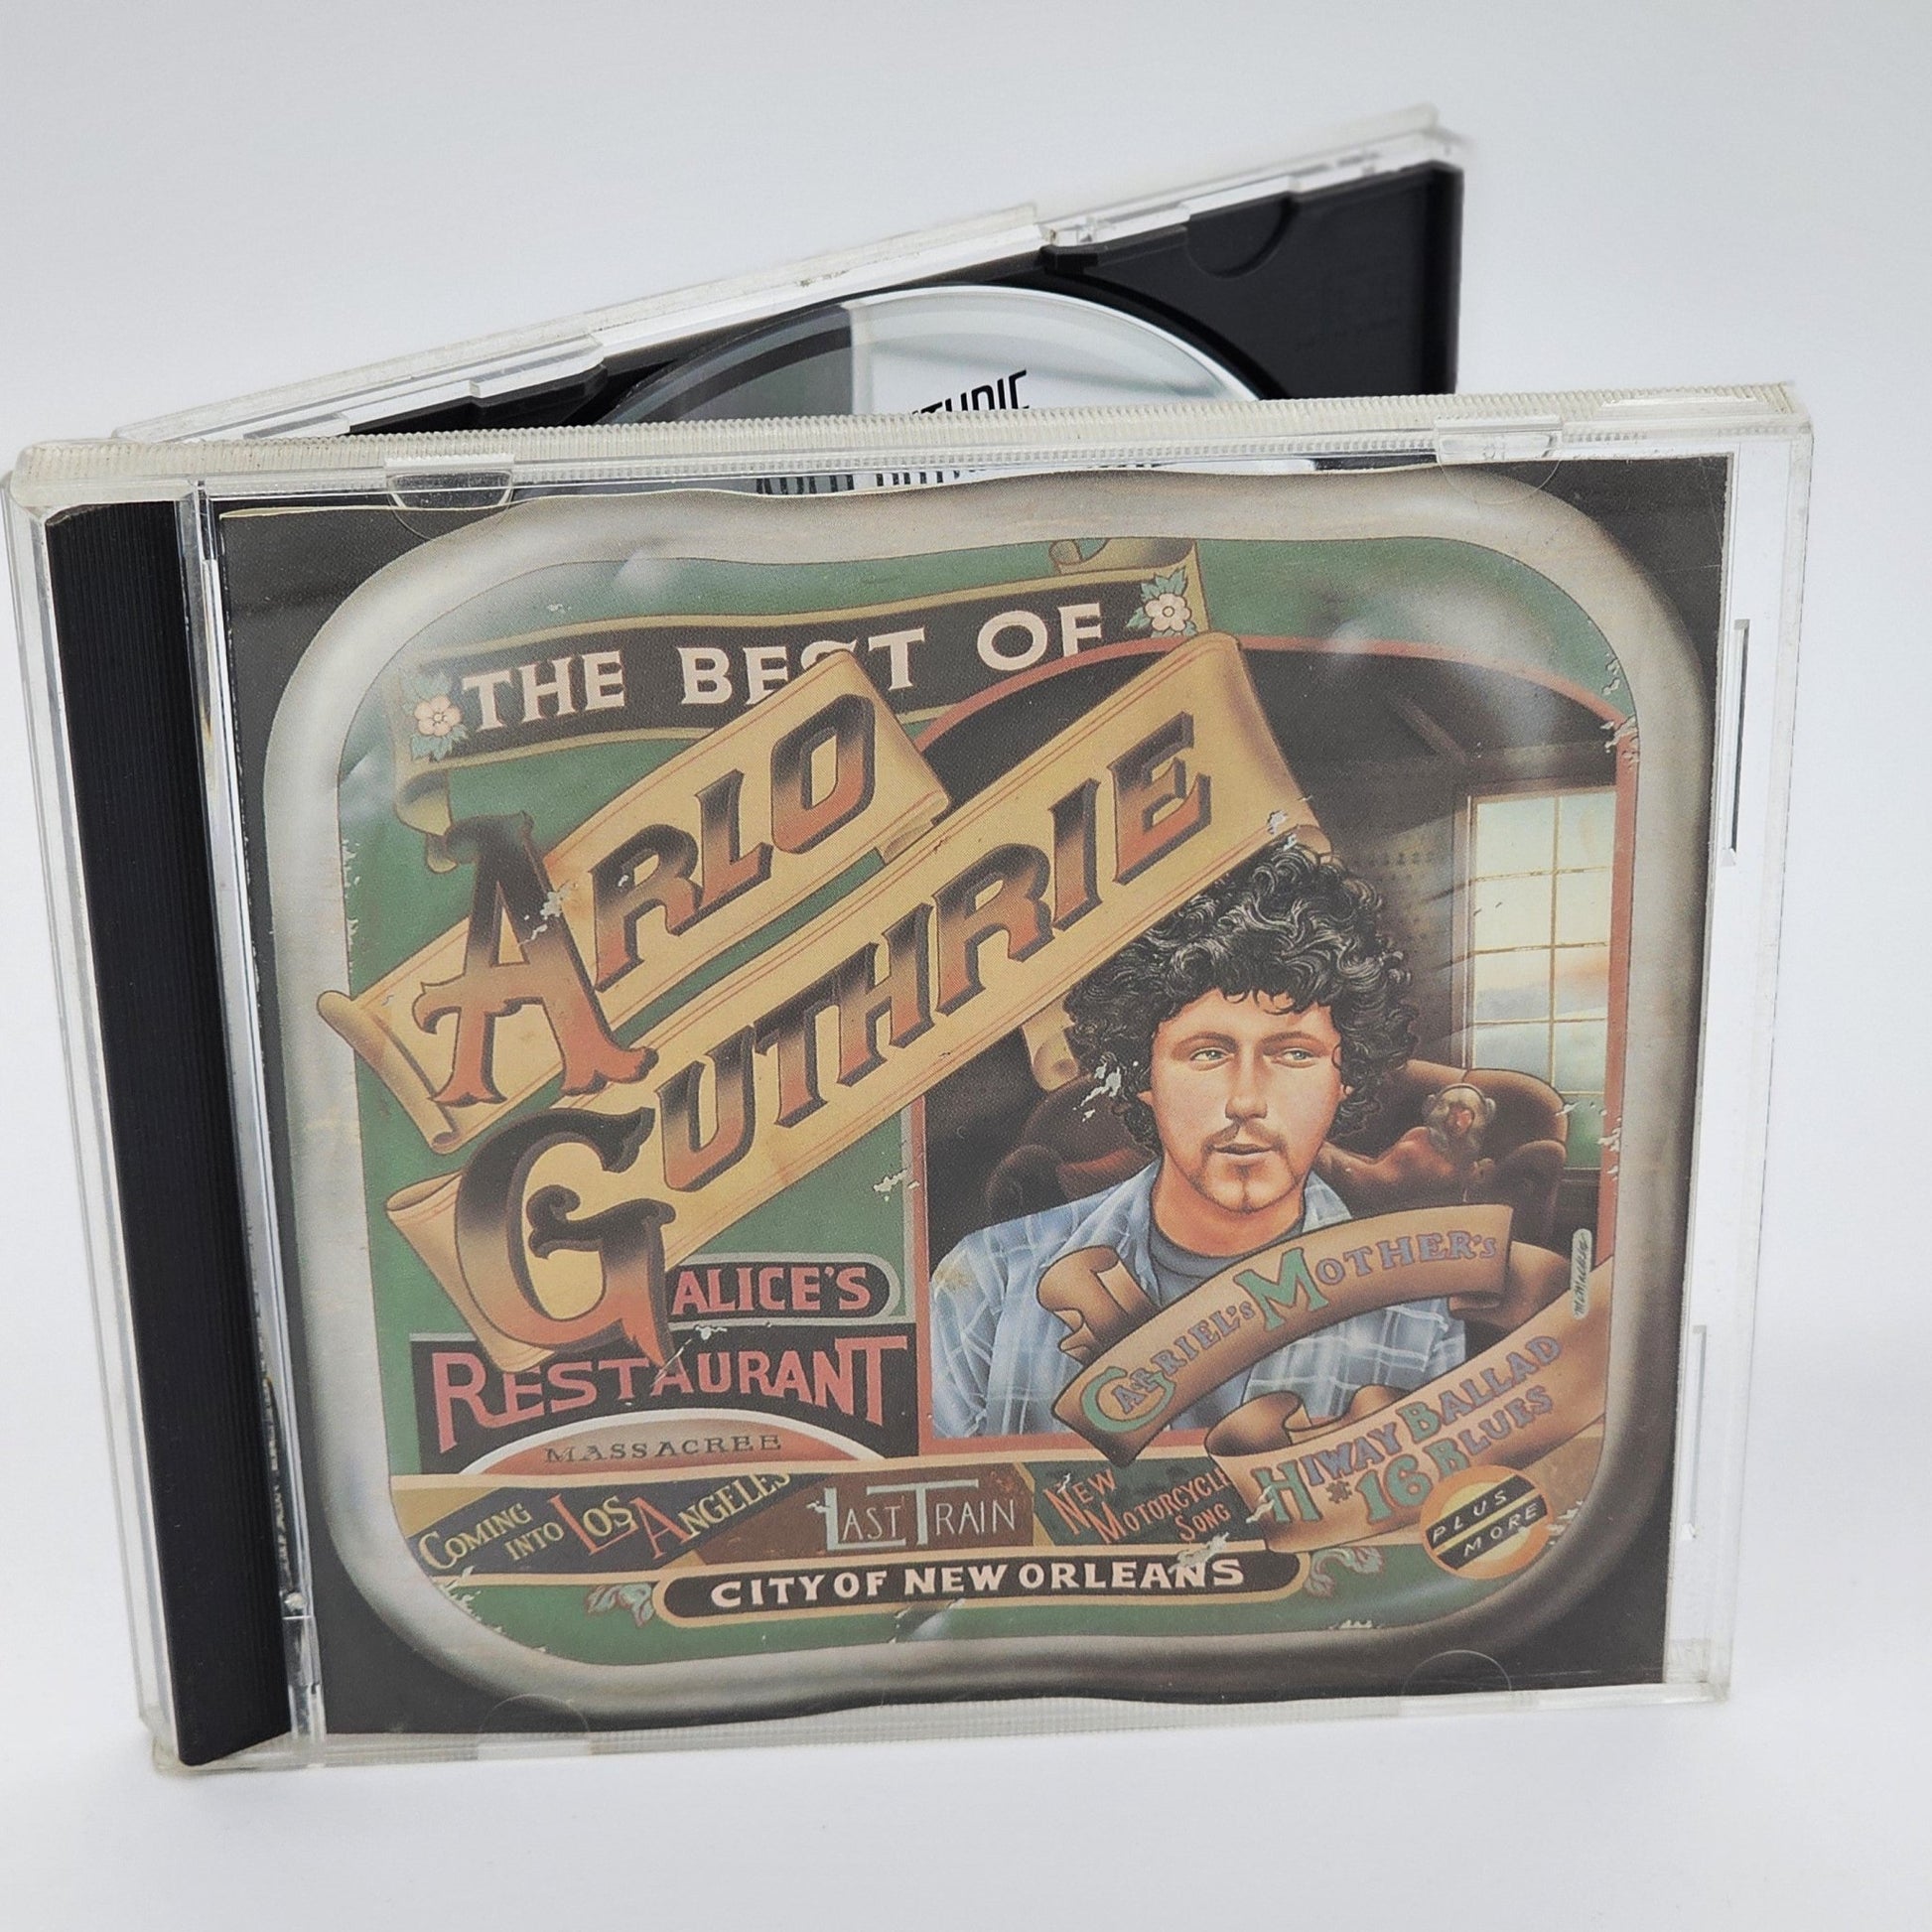 Warner Records - Arlo Guthrie | The Best Of Arlo Guthrie | CD - Compact Disc - Steady Bunny Shop